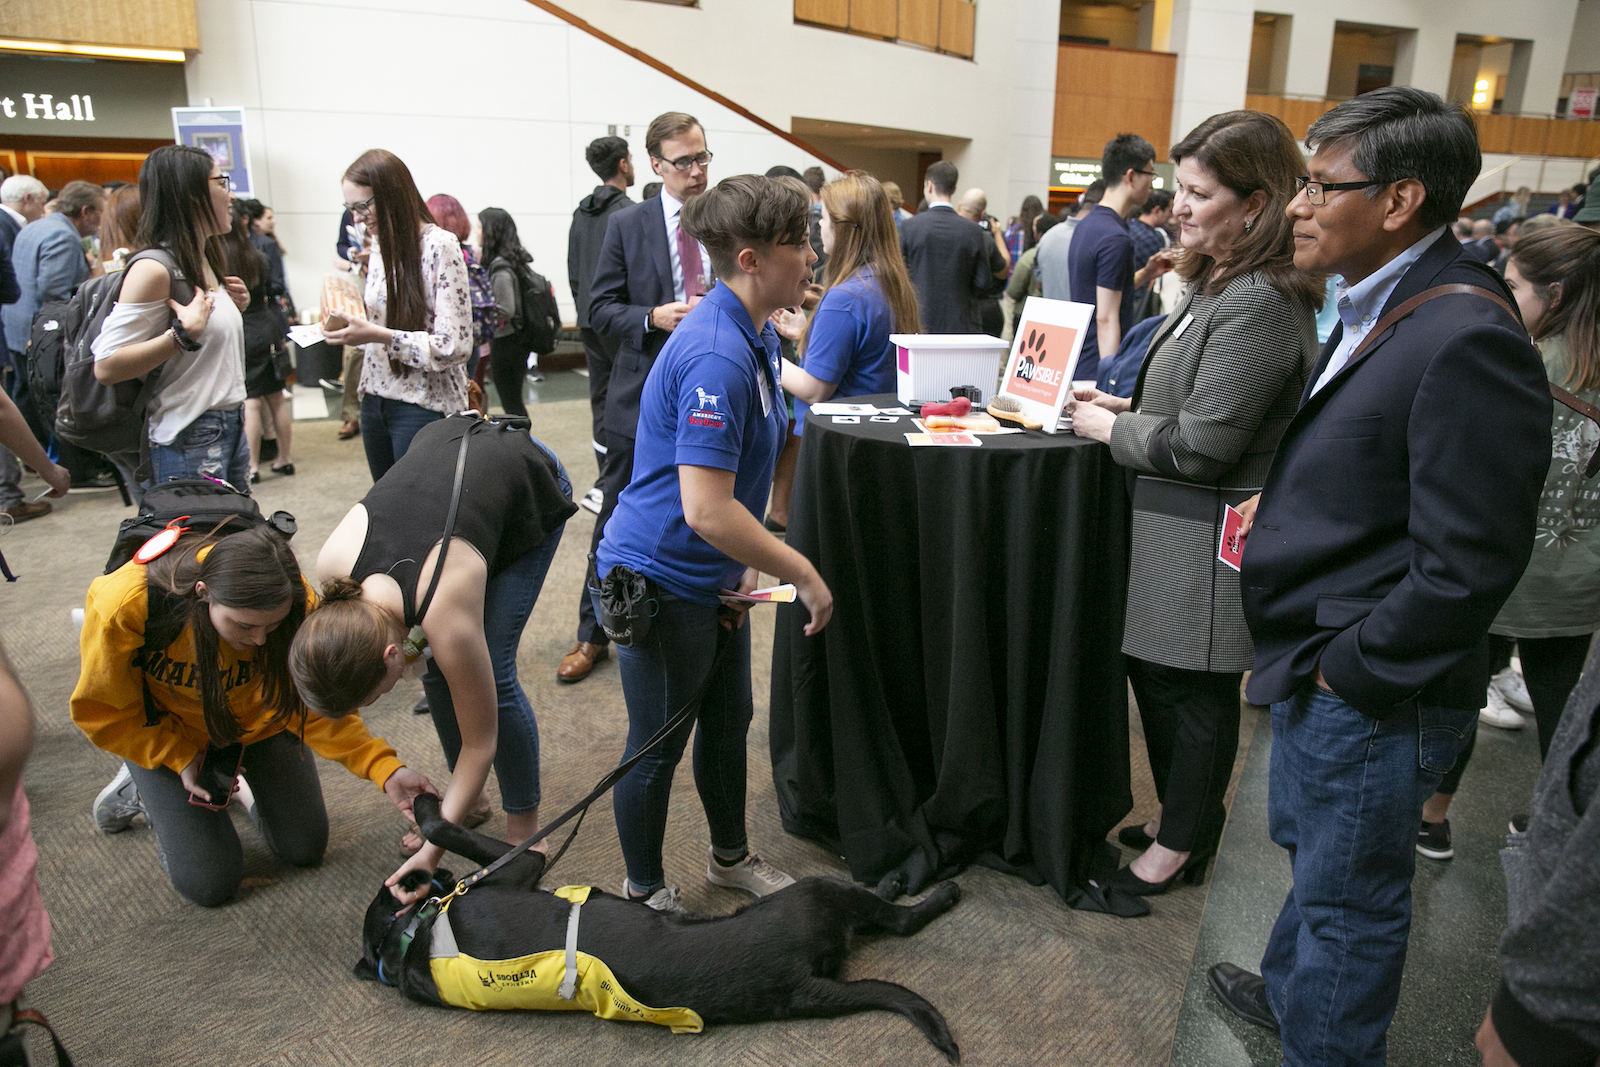 dog being pet at Do Good event